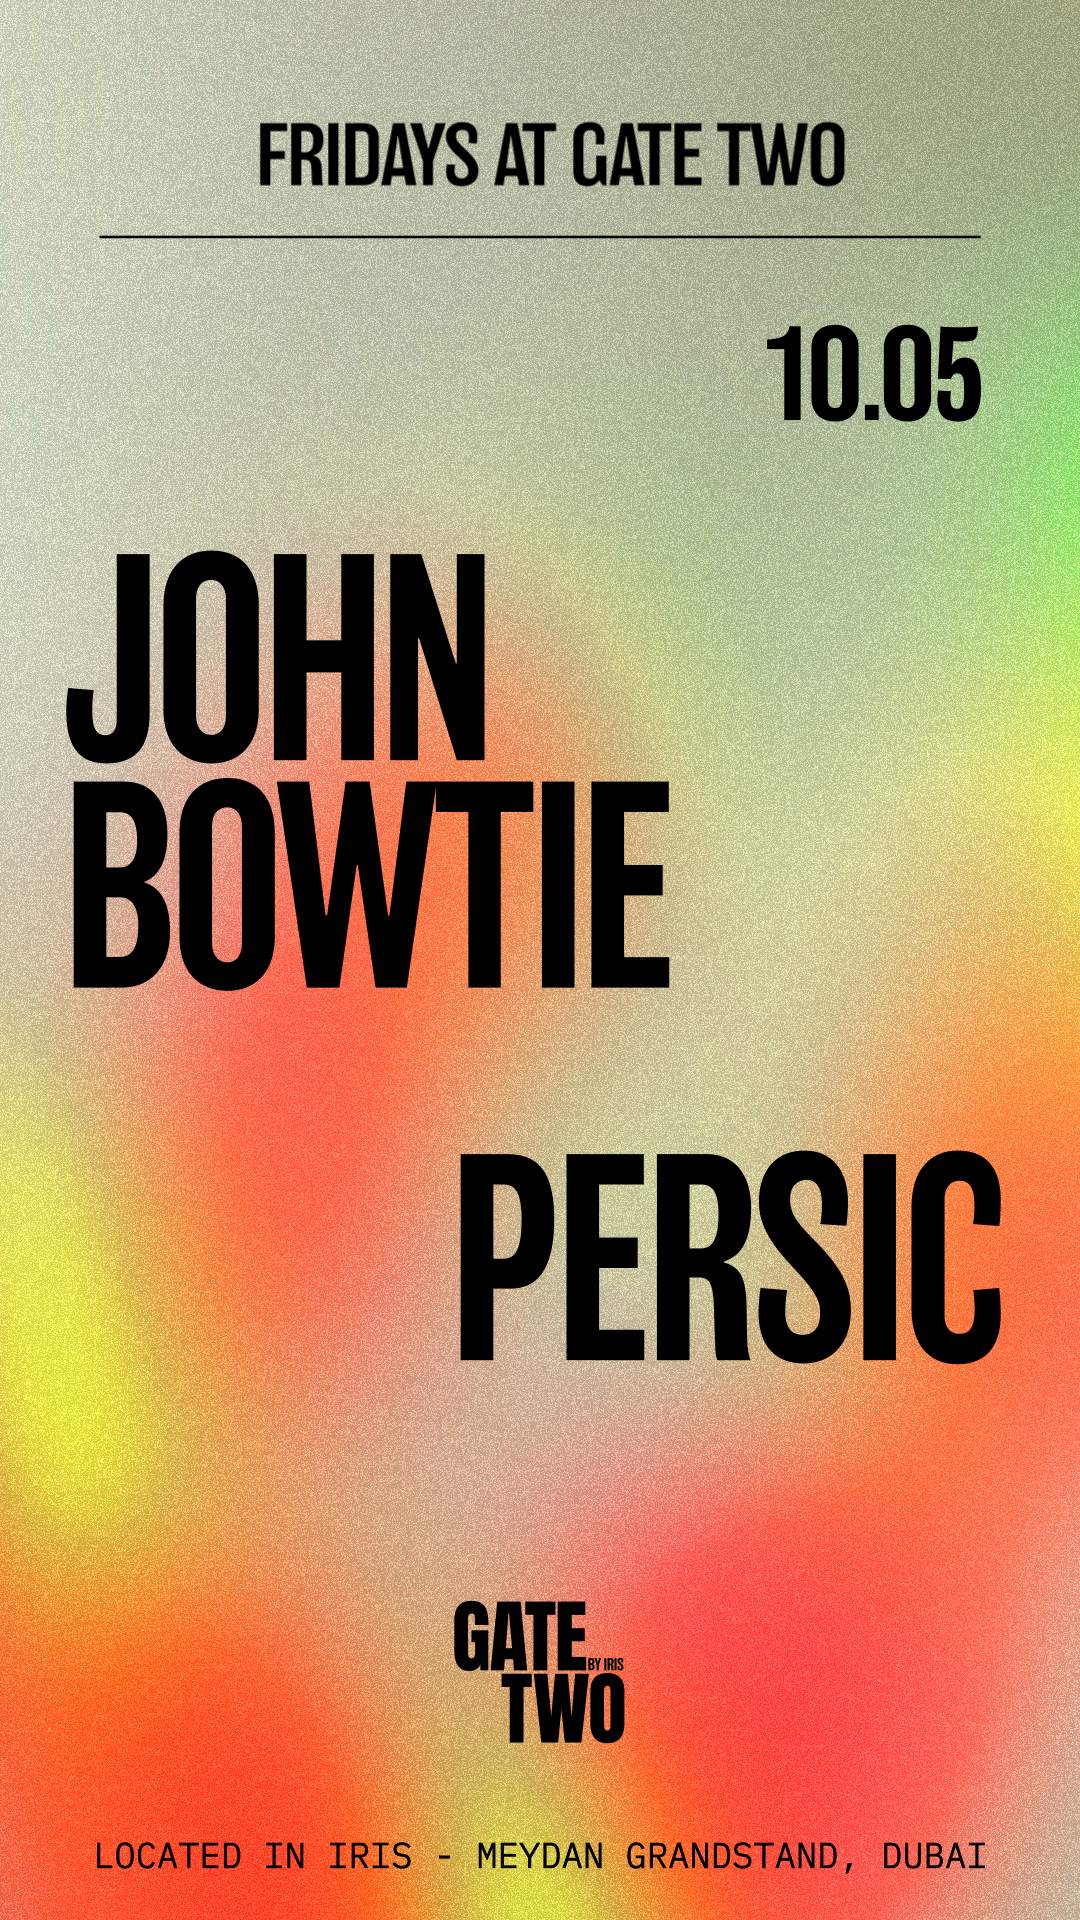 Fridays AT GATE TWO with PERSIC / John Bowtie - Página frontal